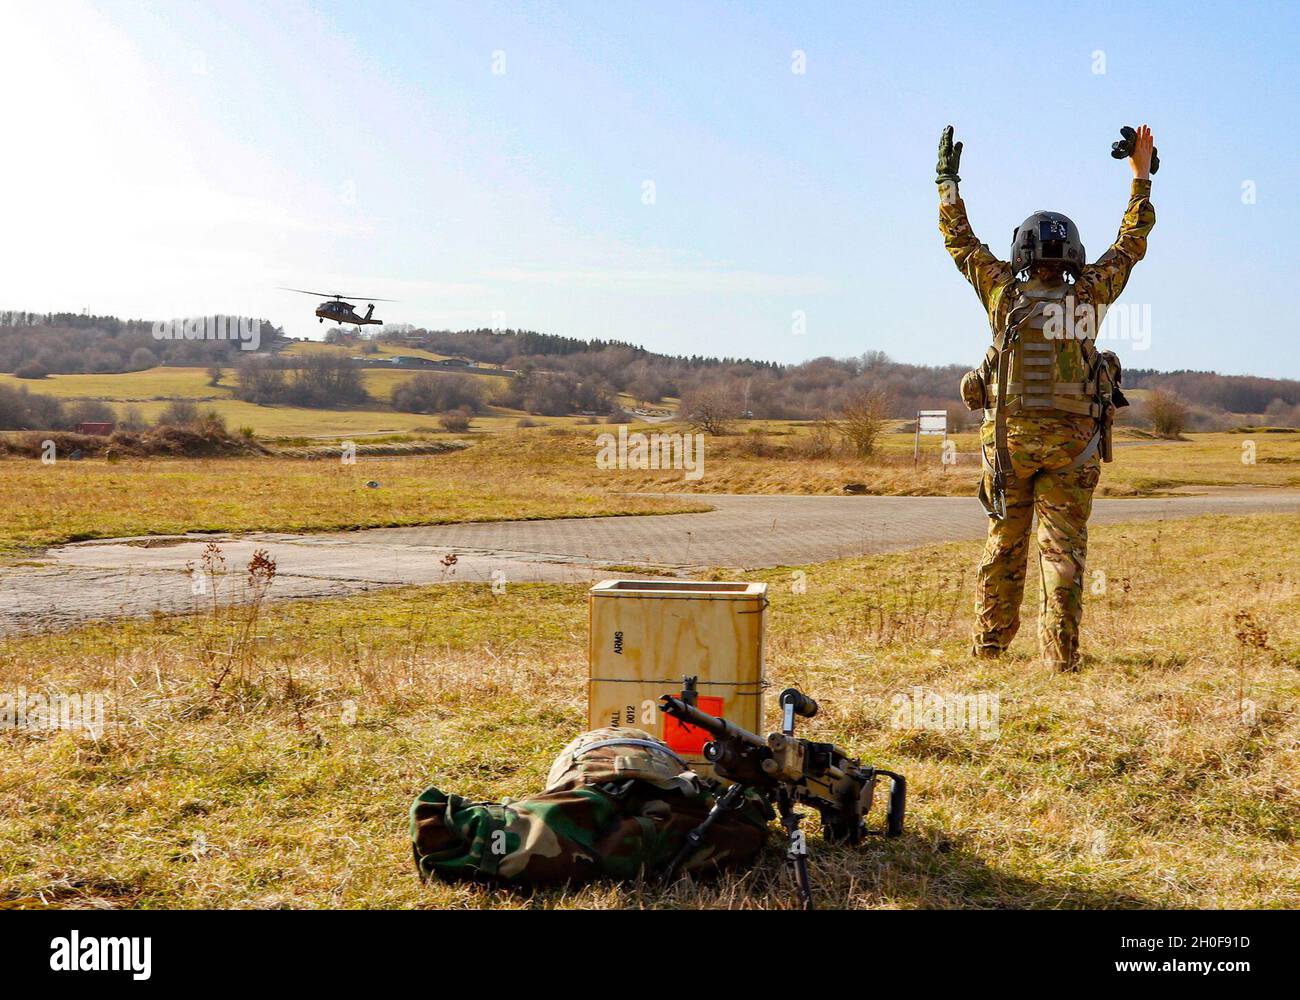 U.S. Army Staff Sgt. Vanessa Goggia, a crew chief with Alpha Company, 1st Battalion, 214th Aviation Regiment, delivers a hand and arm signal to a UH-60 Black Hawk after completing a ground firing table with the 240B machine gun Feb. 23, 2021, at Baumholder Training Area, Baumholder, Germany, as part of Cougar Flurry, the battalion's training exercise. Stock Photo